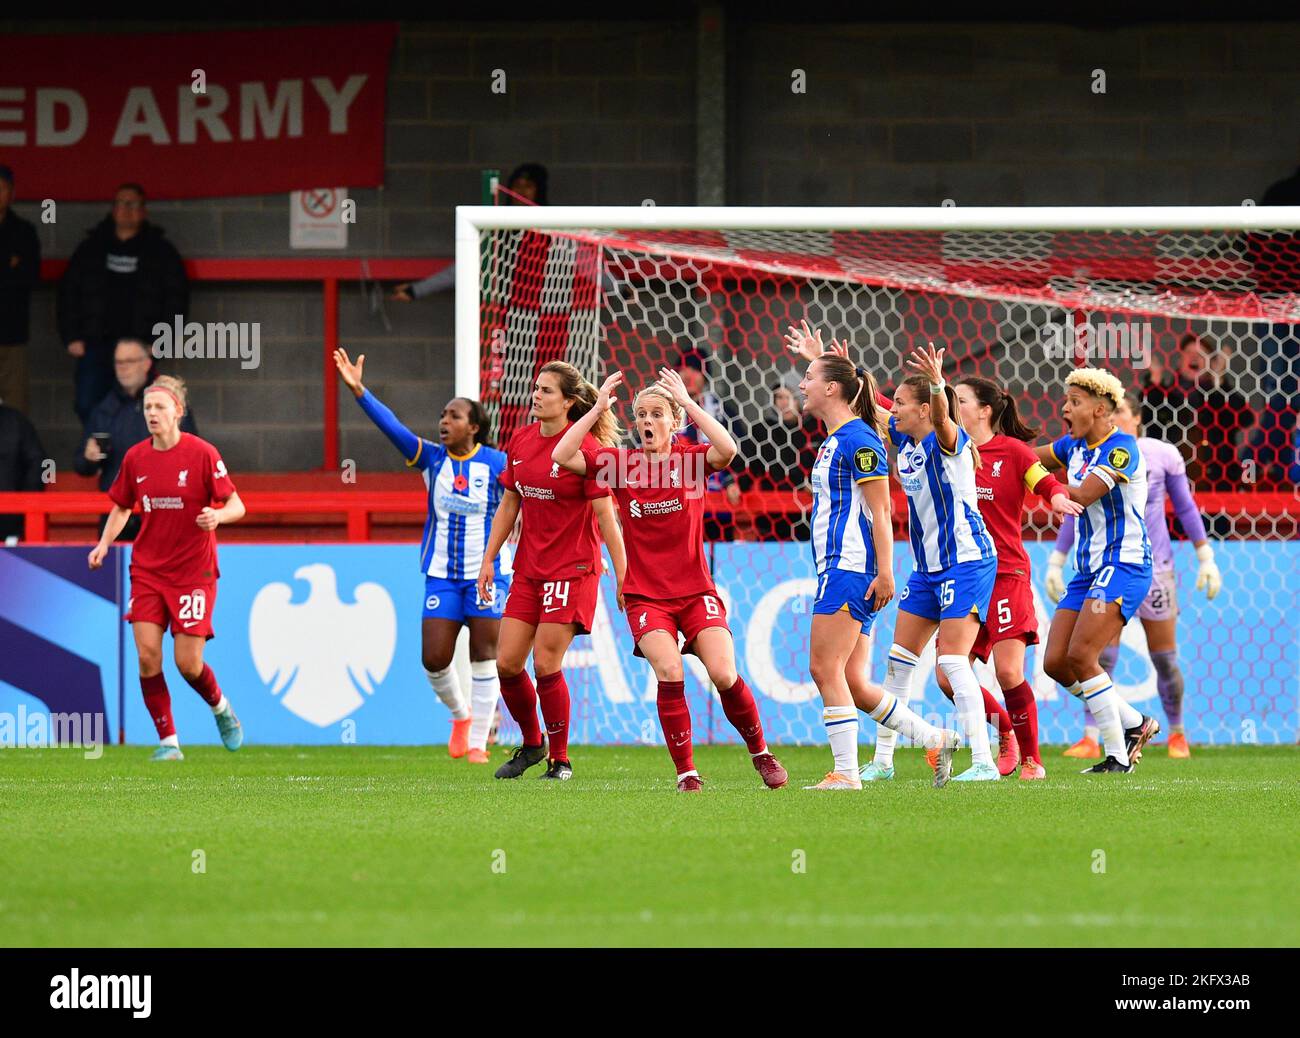 Crawley, UK. 20th Nov, 2022. Brighton players appeal for a penalty during the FA Women's Super League match between Brighton & Hove Albion Women and Liverpool Women at The People's Pension Stadium on November 20th 2022 in Crawley, United Kingdom. (Photo by Jeff Mood/phcimages.com) Credit: PHC Images/Alamy Live News Stock Photo